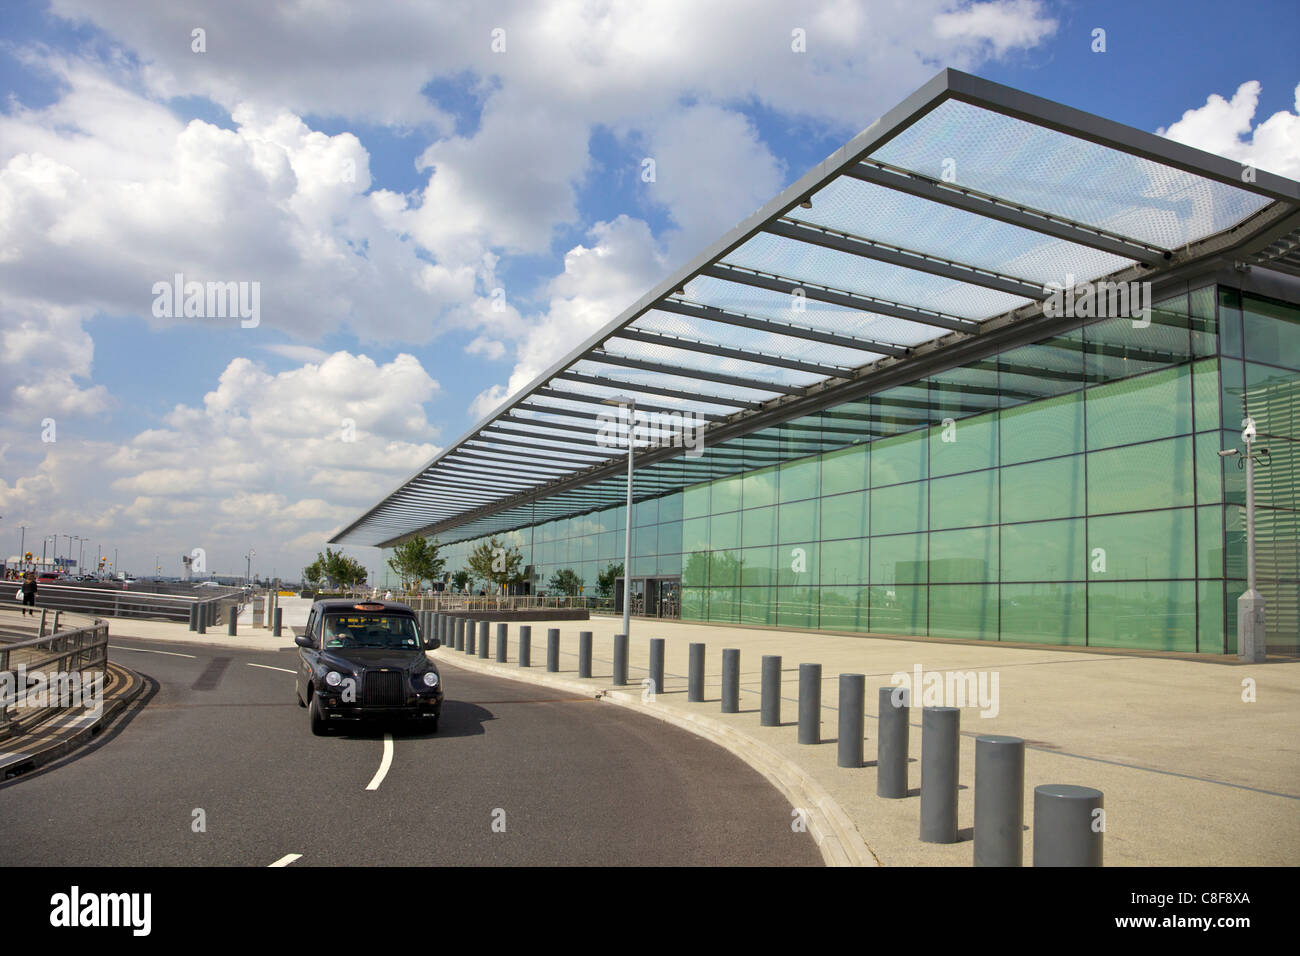 Black taxi cab drives away from Terminal 4, Heathrow Airport, London, England, United Kingdom Stock Photo